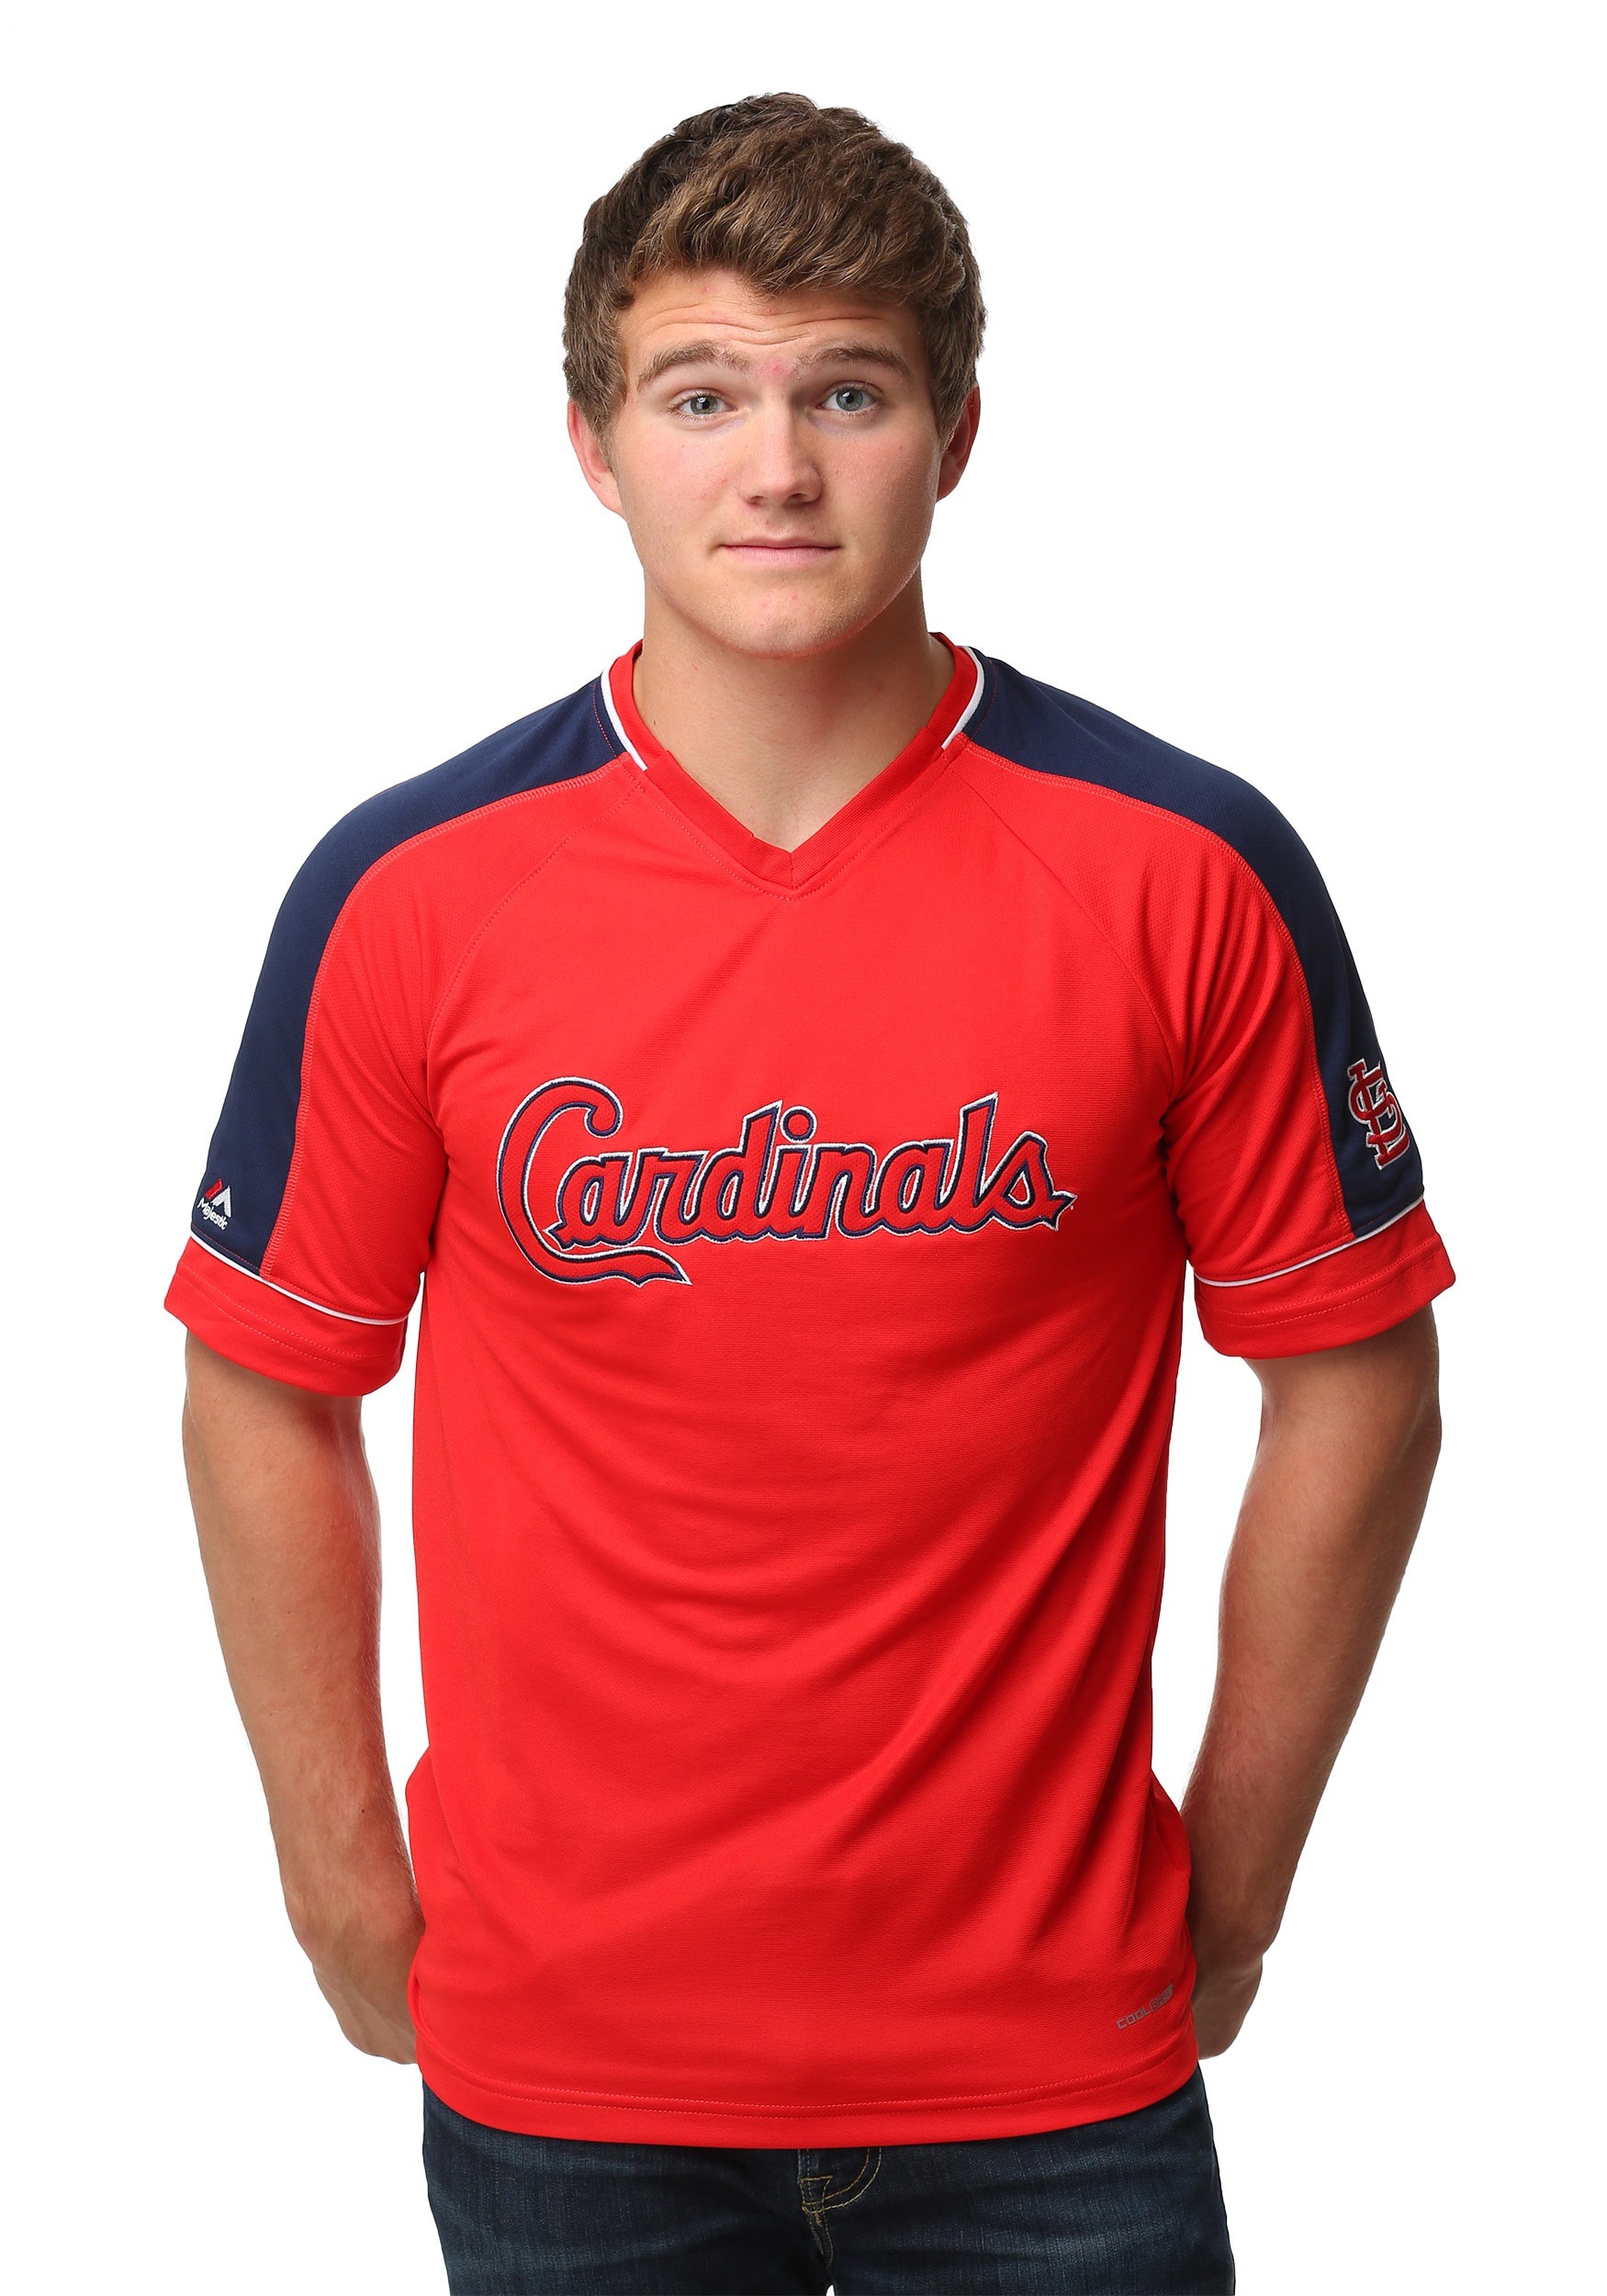  Majestic Athletic Adult Small St Louis Cardinals